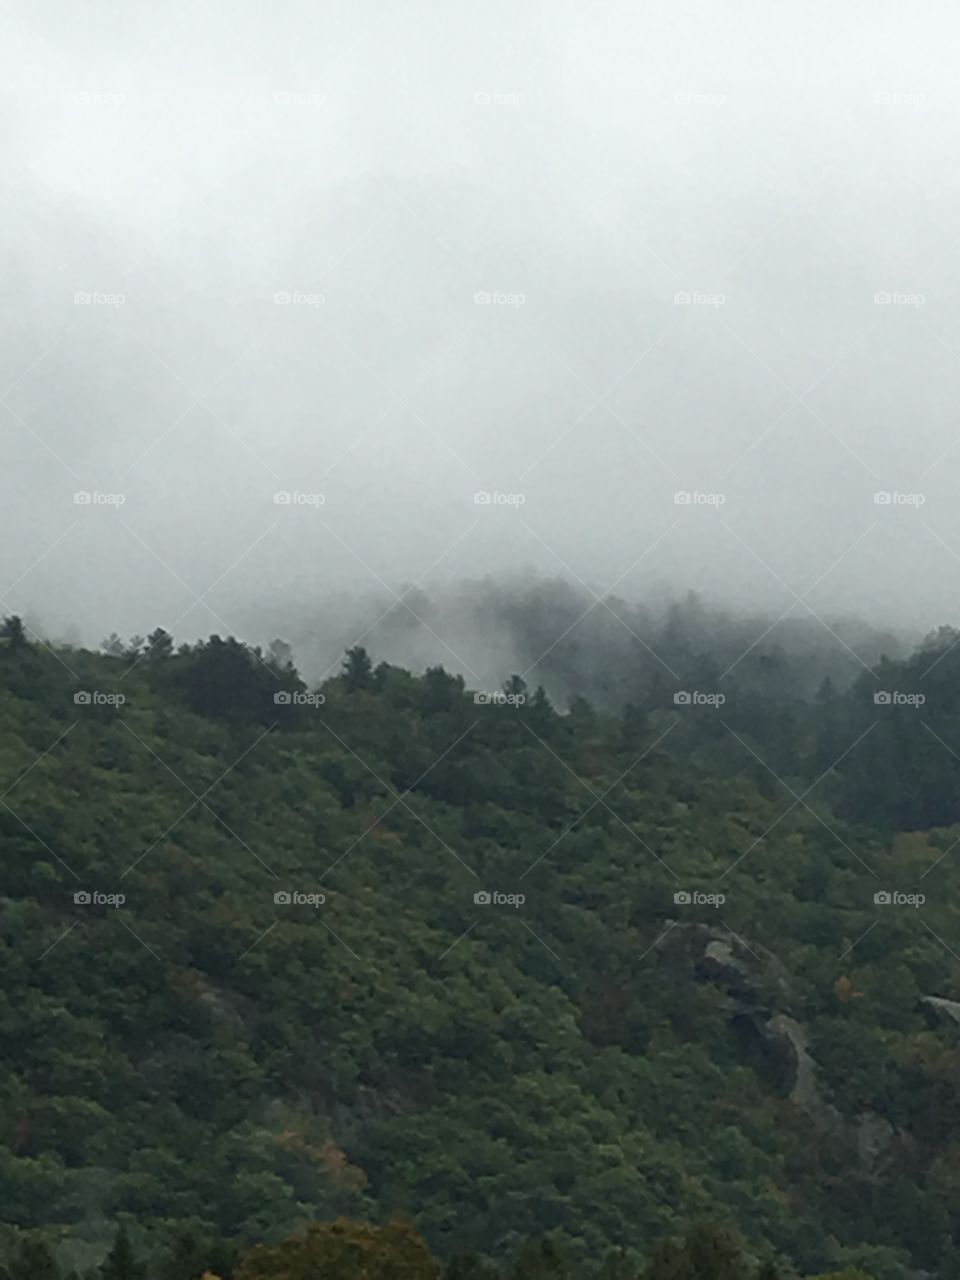 Misty mountains in October weather